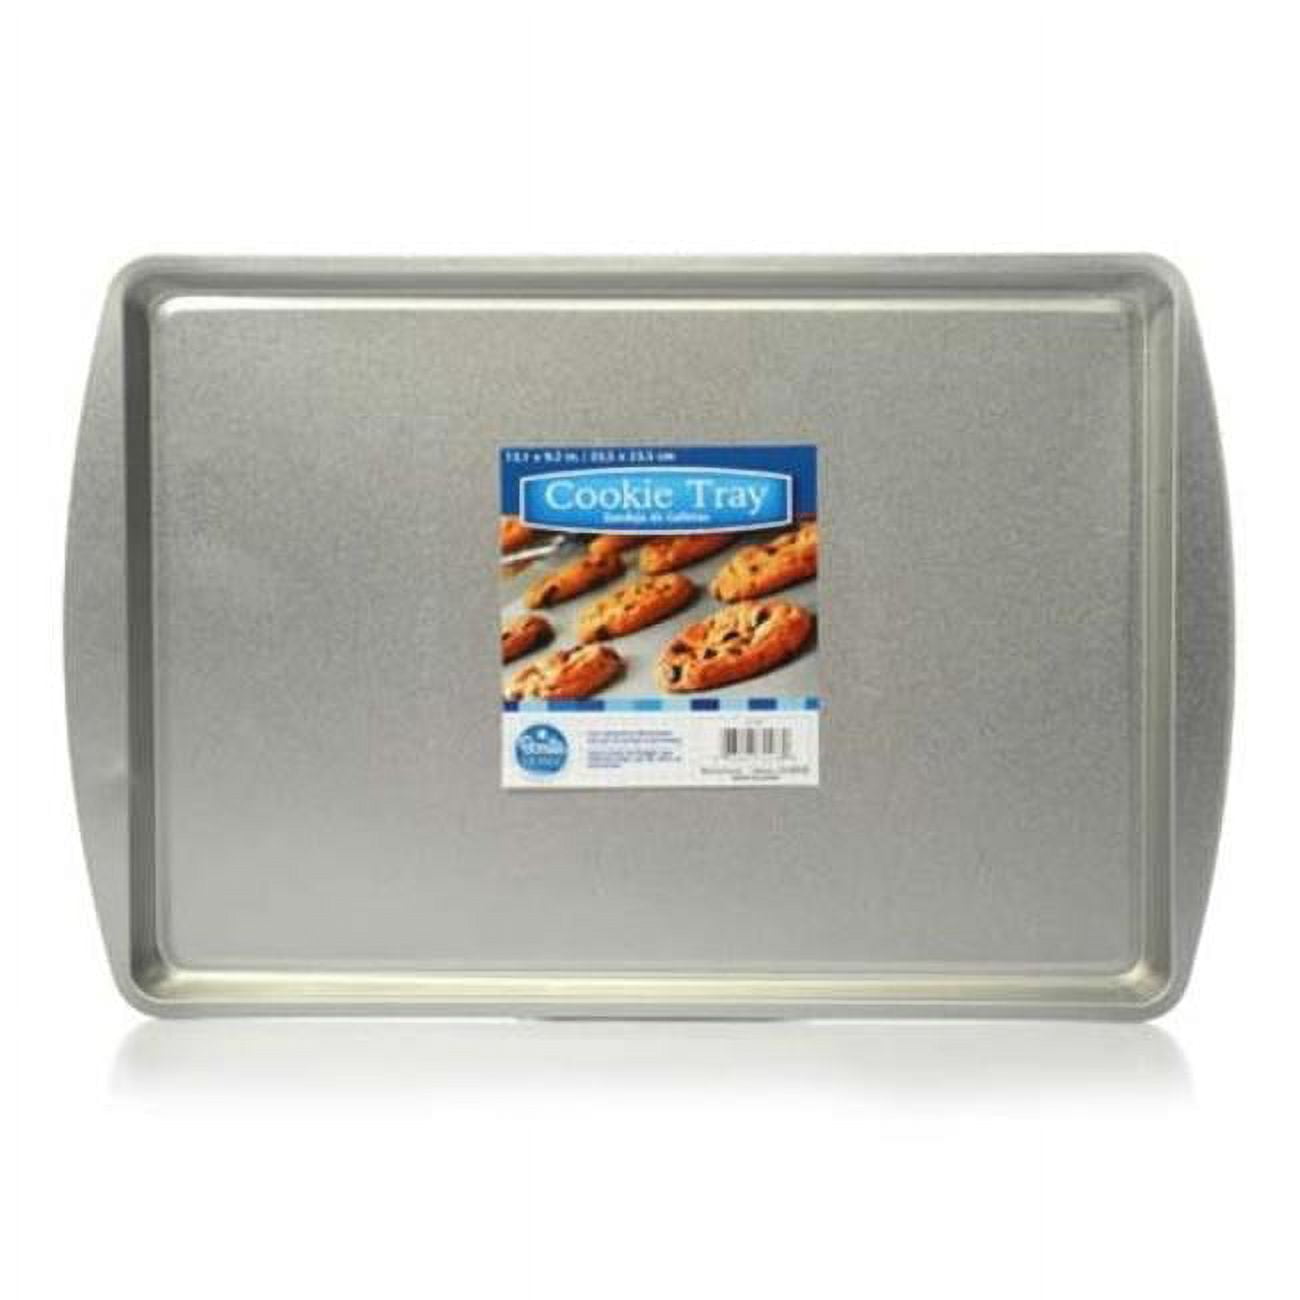 Picture of Bonita Home 2329565 Aluminum Cookie Tray - Case of 48